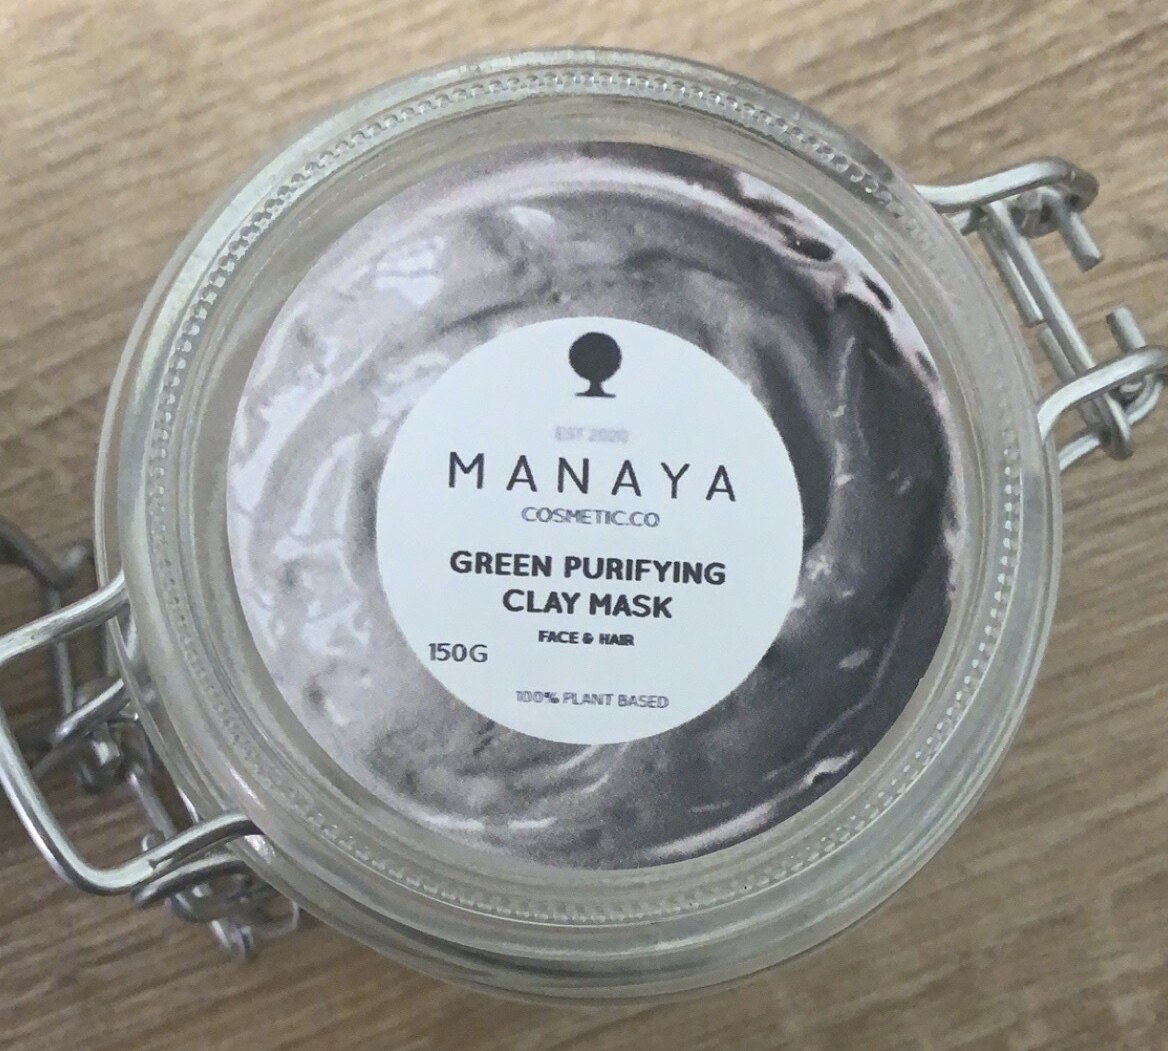 GREEN PURIFYING CLAY MASK